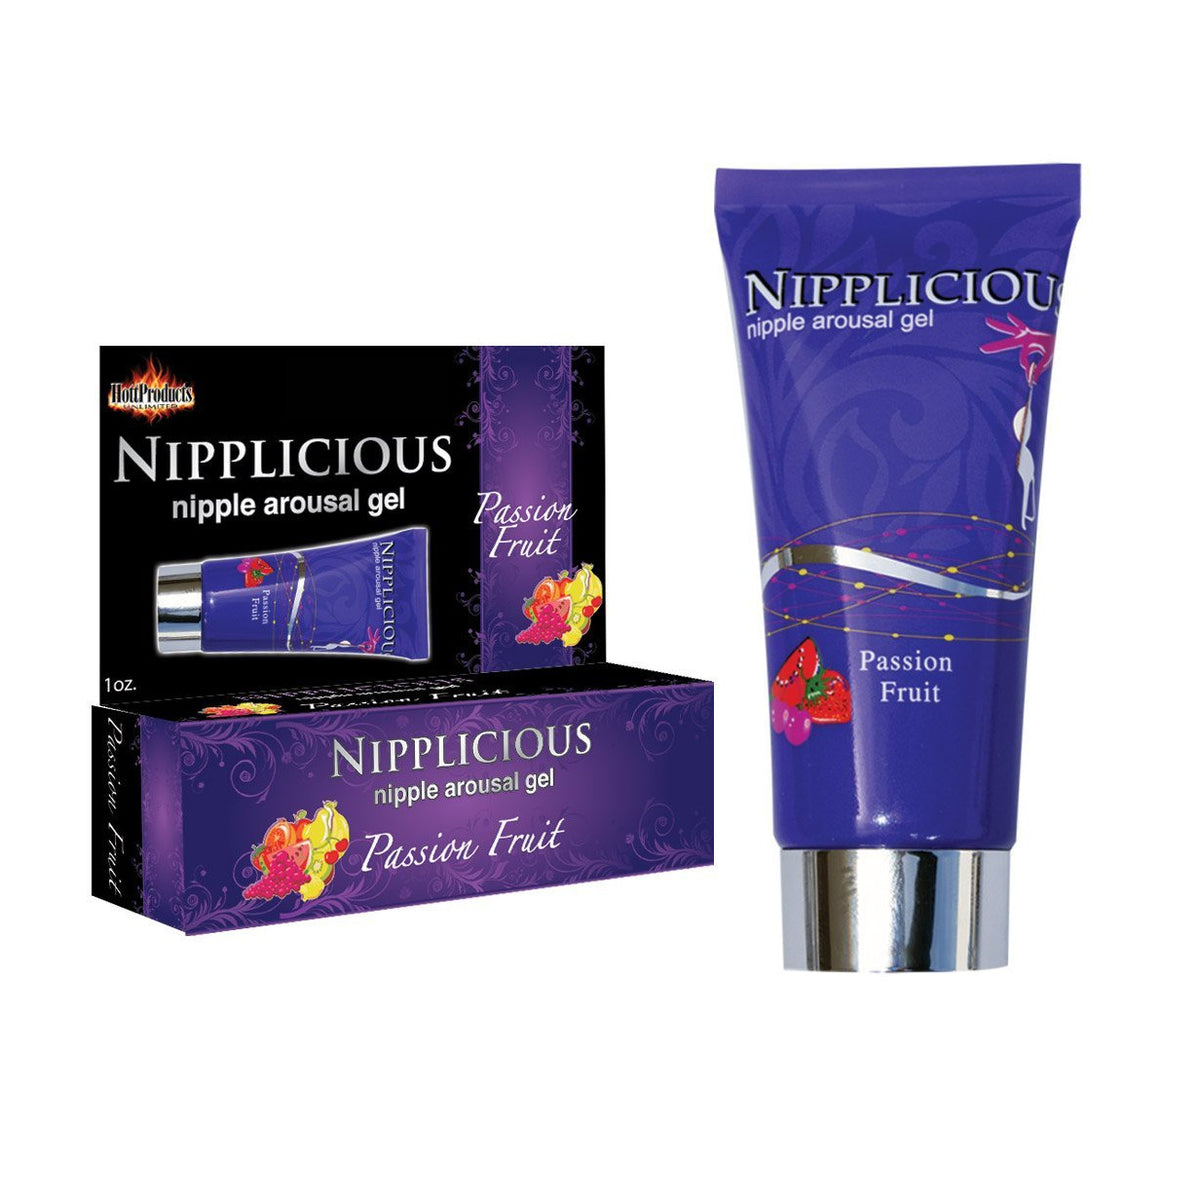 Hott Products Nipplicious Nipple Arousal Gel - Passion Fruit